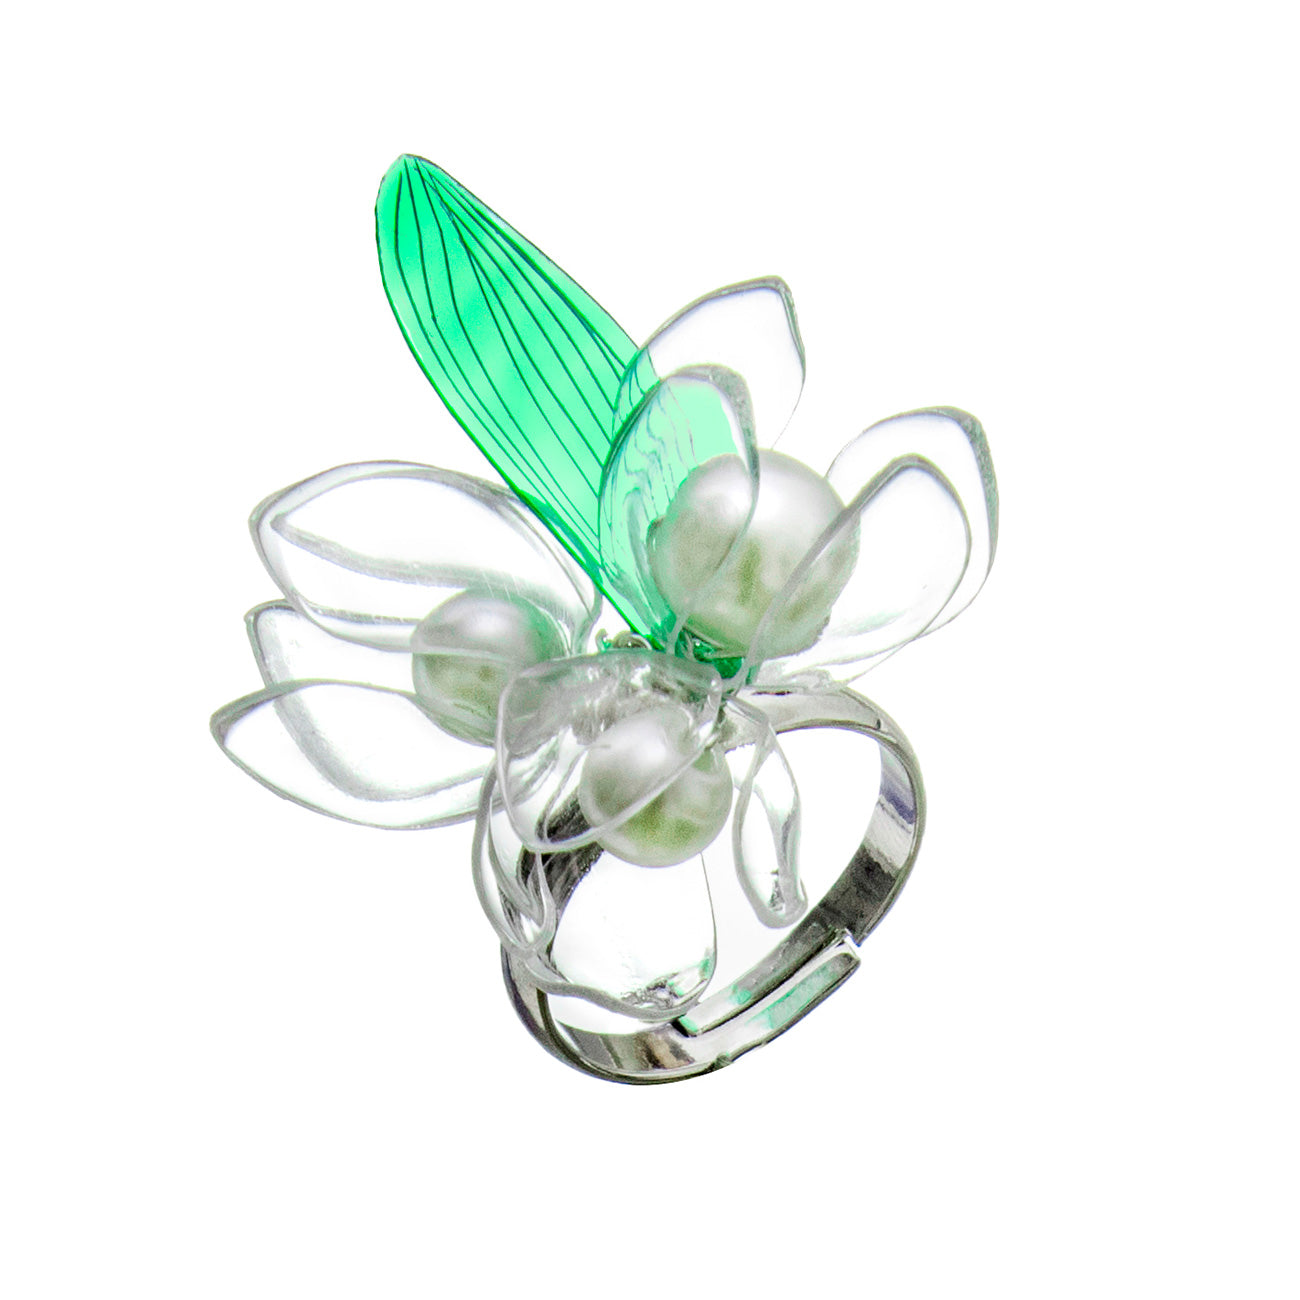 Maiglöckchen-Ring - Lily of the Valley Ring-0